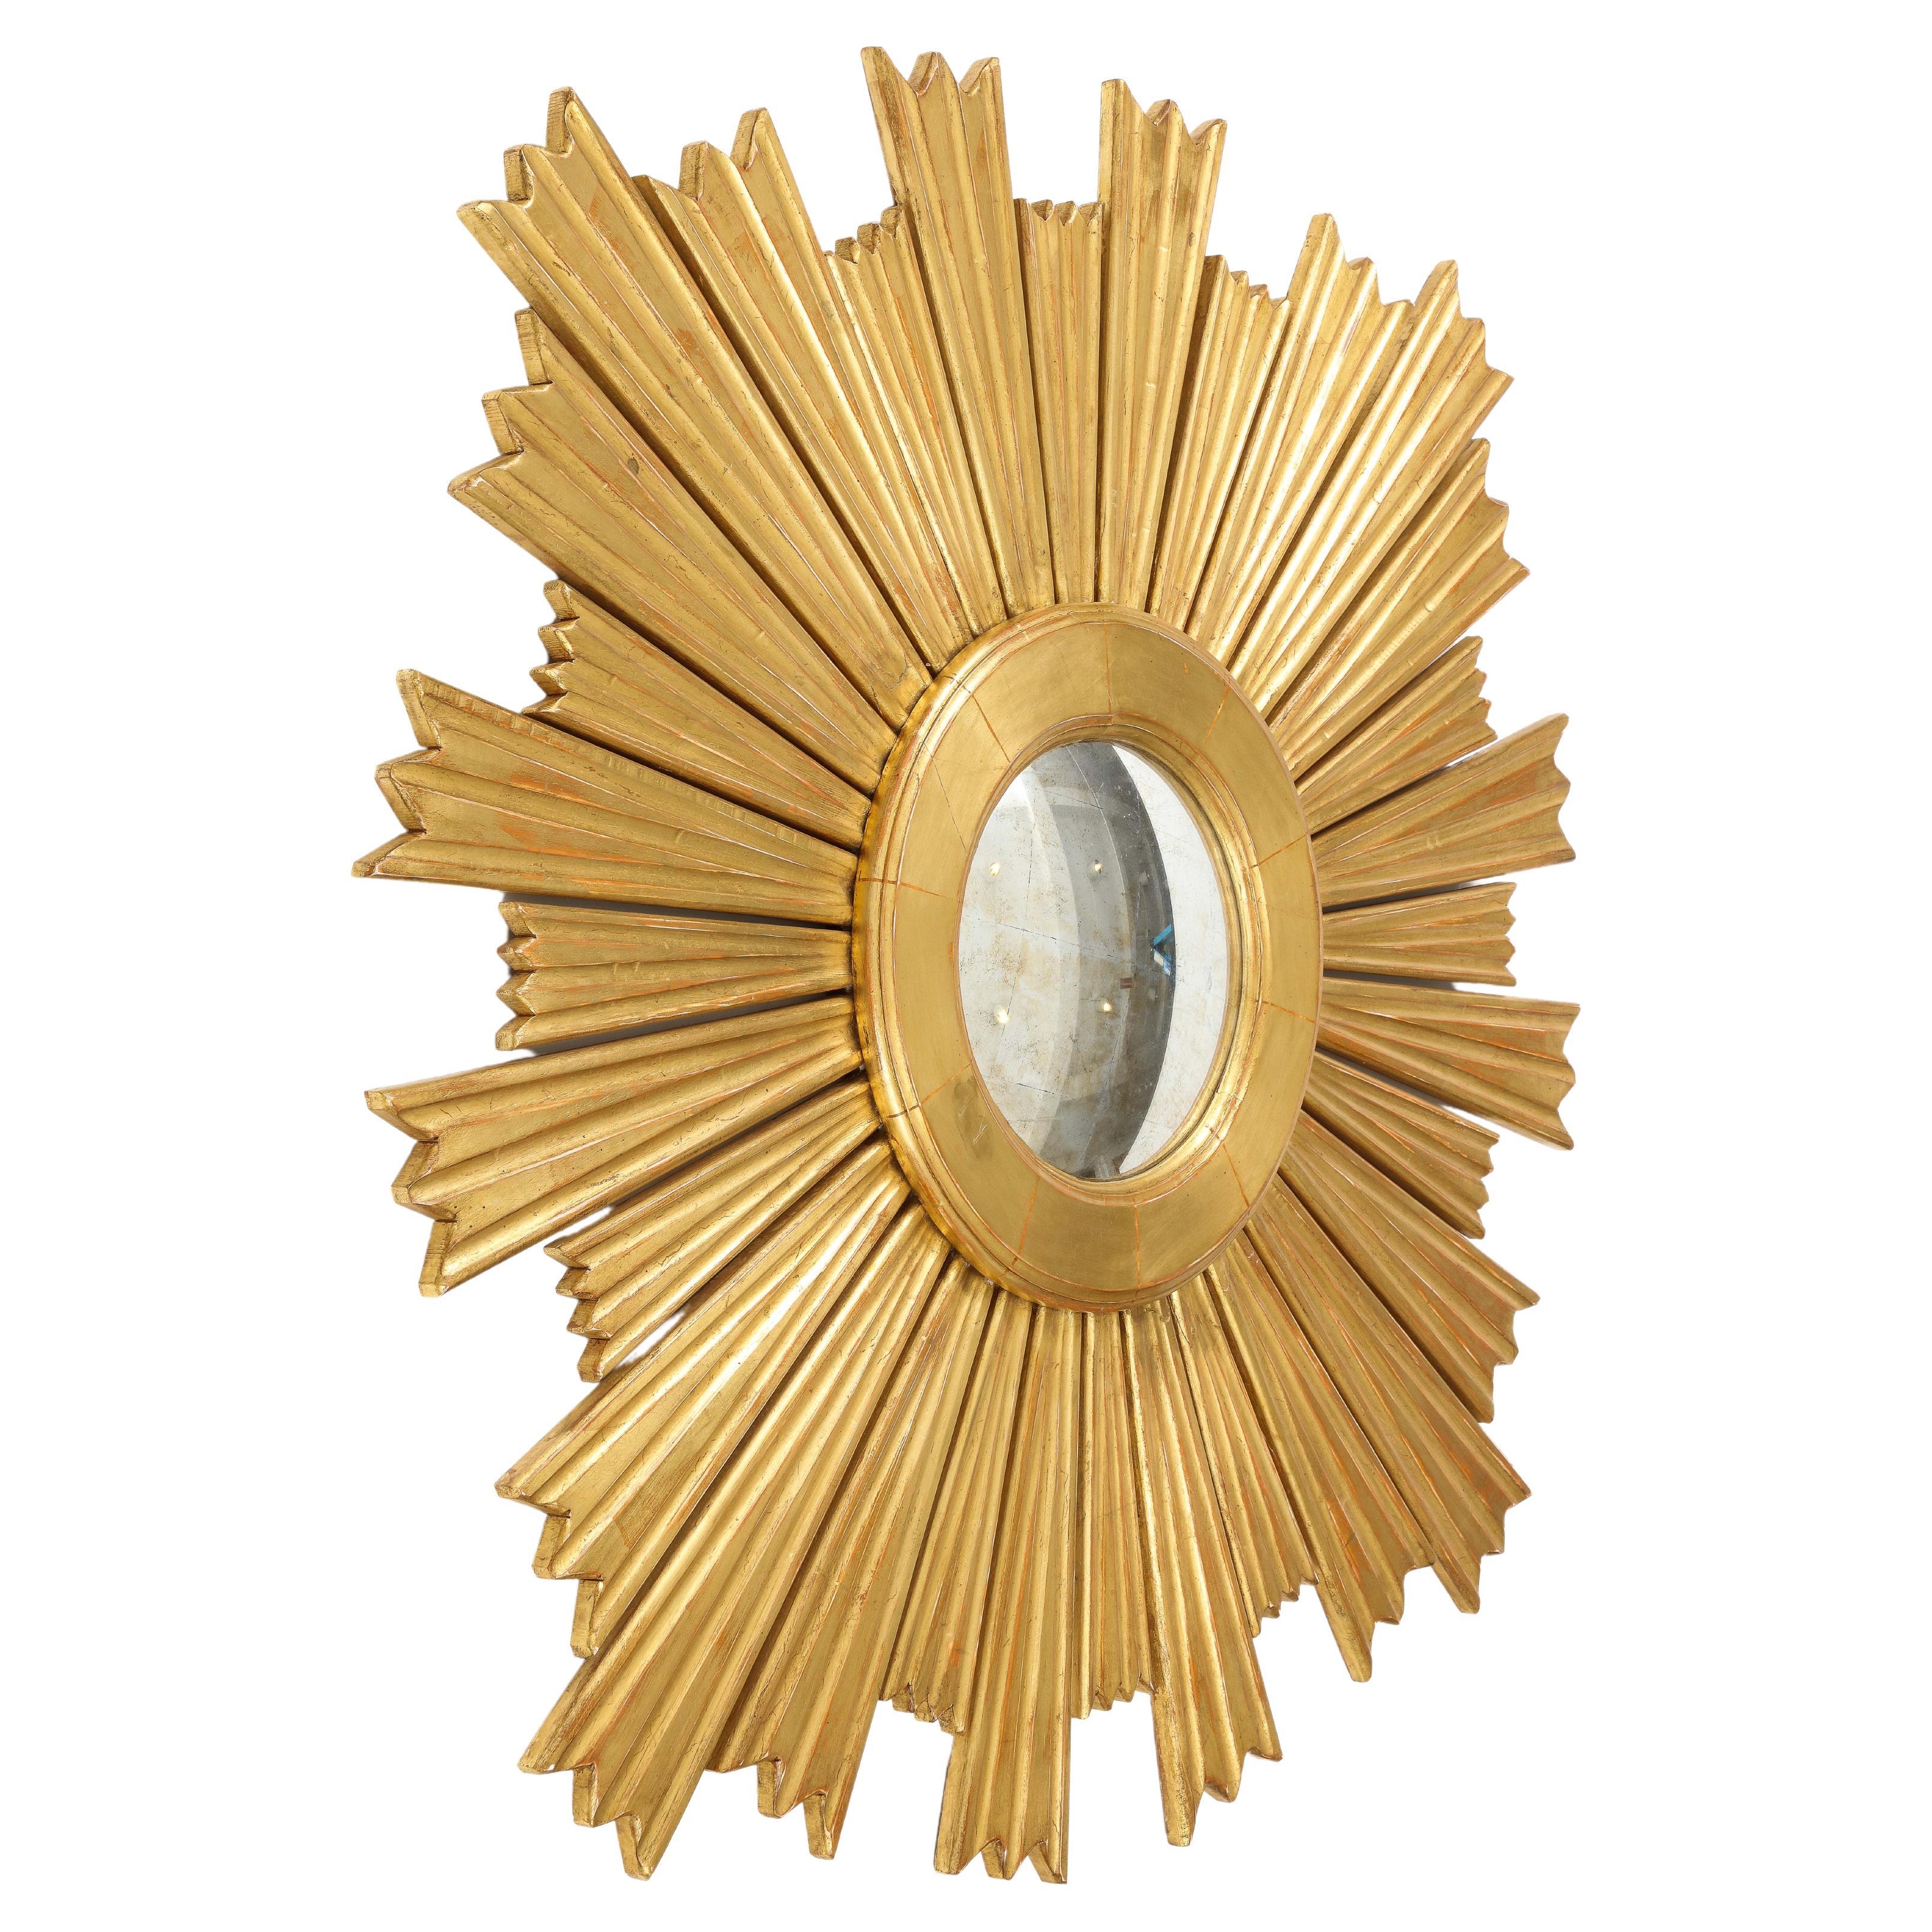 A stunning giltwood sunburst mirror with graduated carved rays emerging from a molded center ring.  It's large scale would create a statement in any room. 